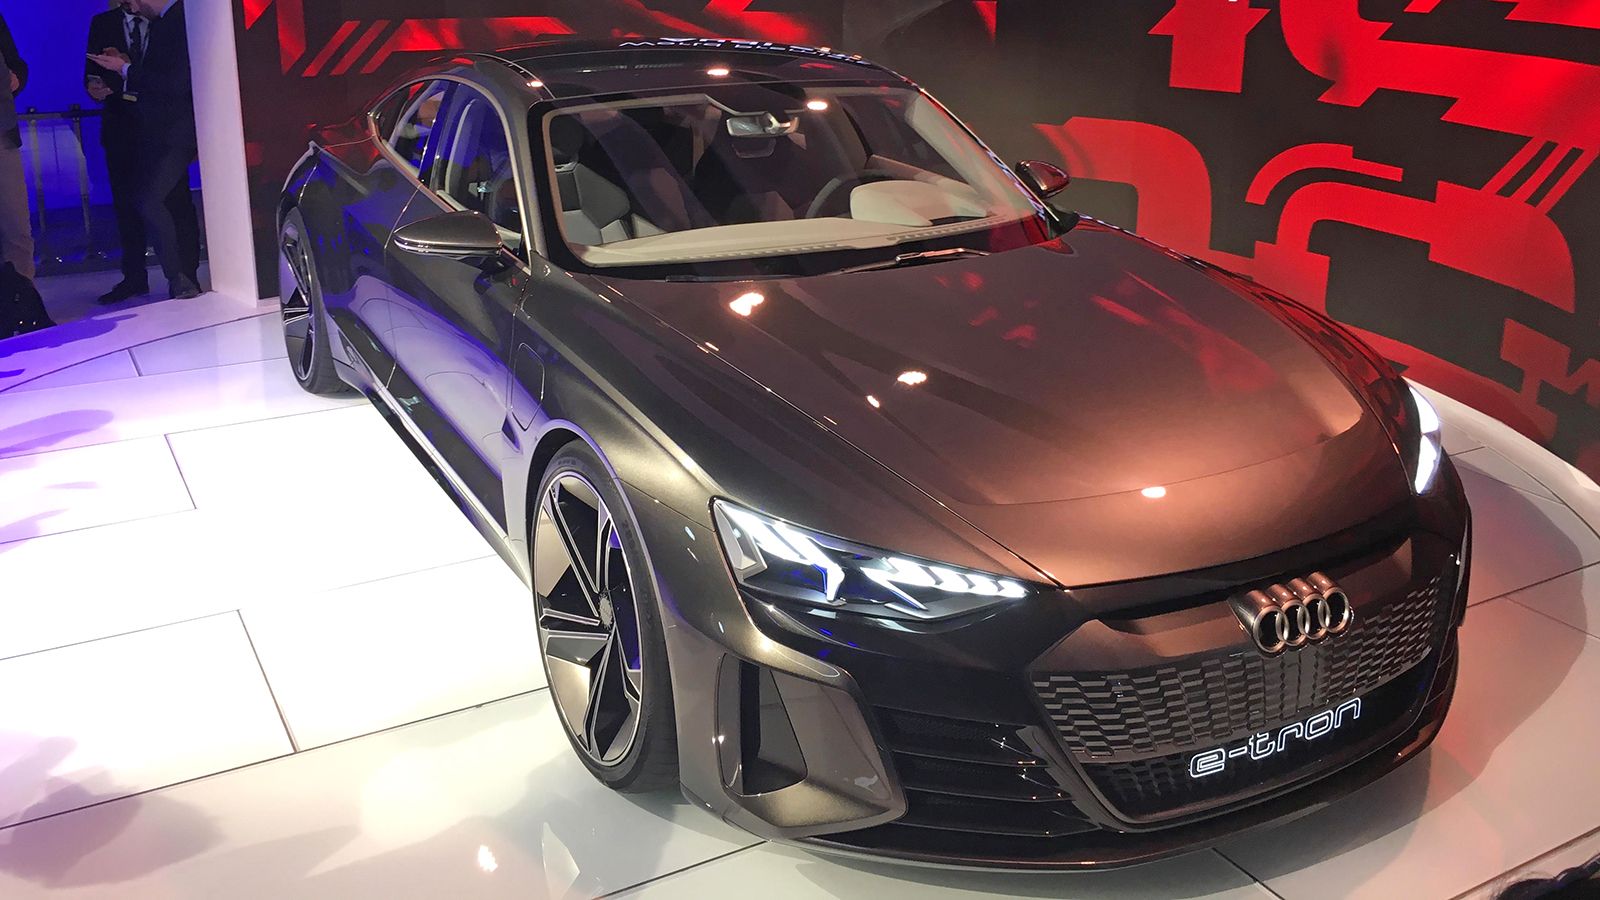 This is Audi's new 590bhp e-tron GT concept